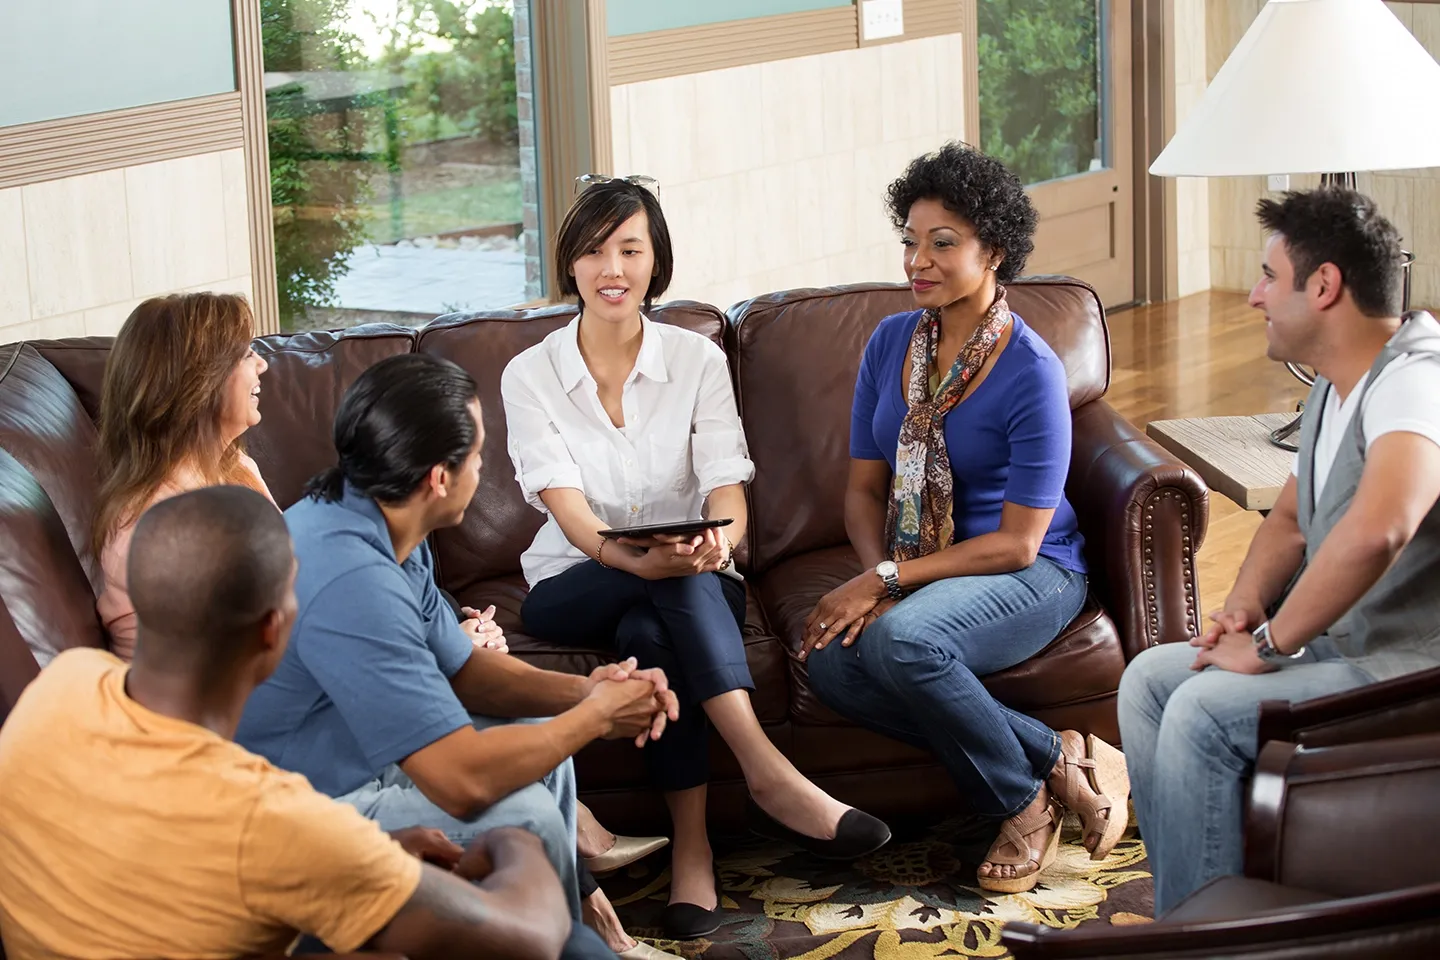 Several people of different ethnicities sit together having a group discussion.